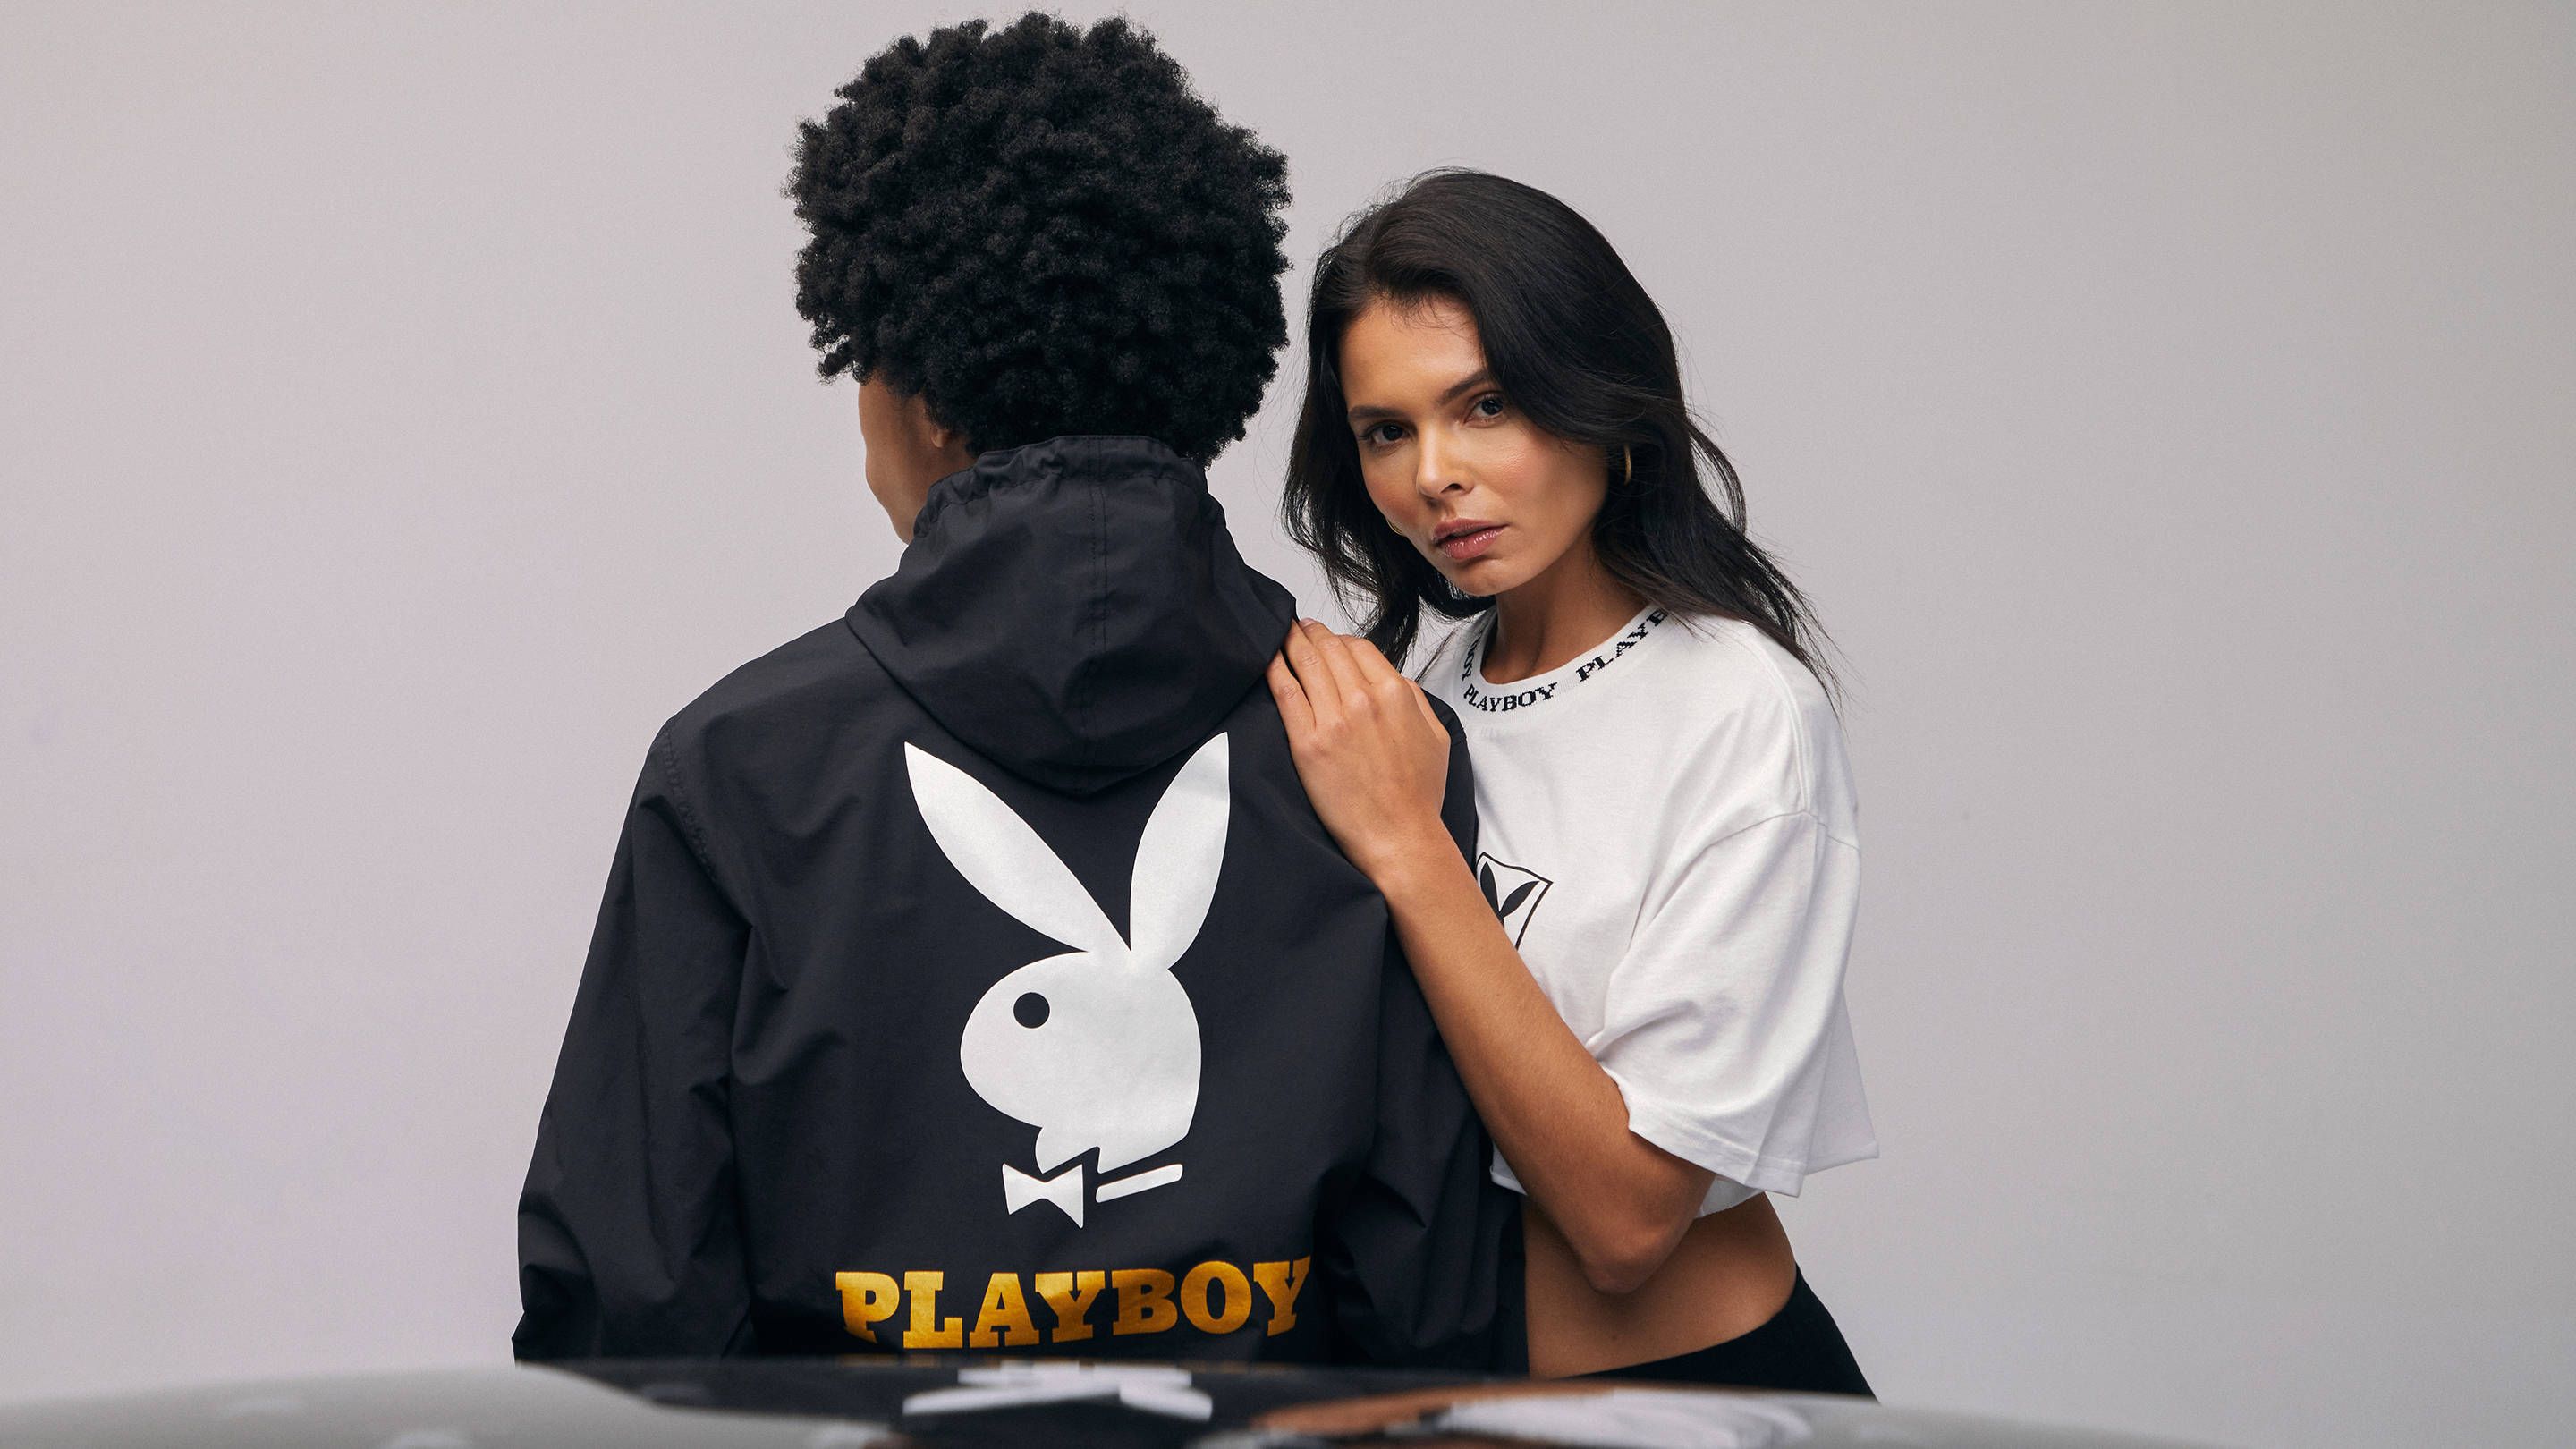 Playboy for PacSun: Spring/Summer 2019 Collection